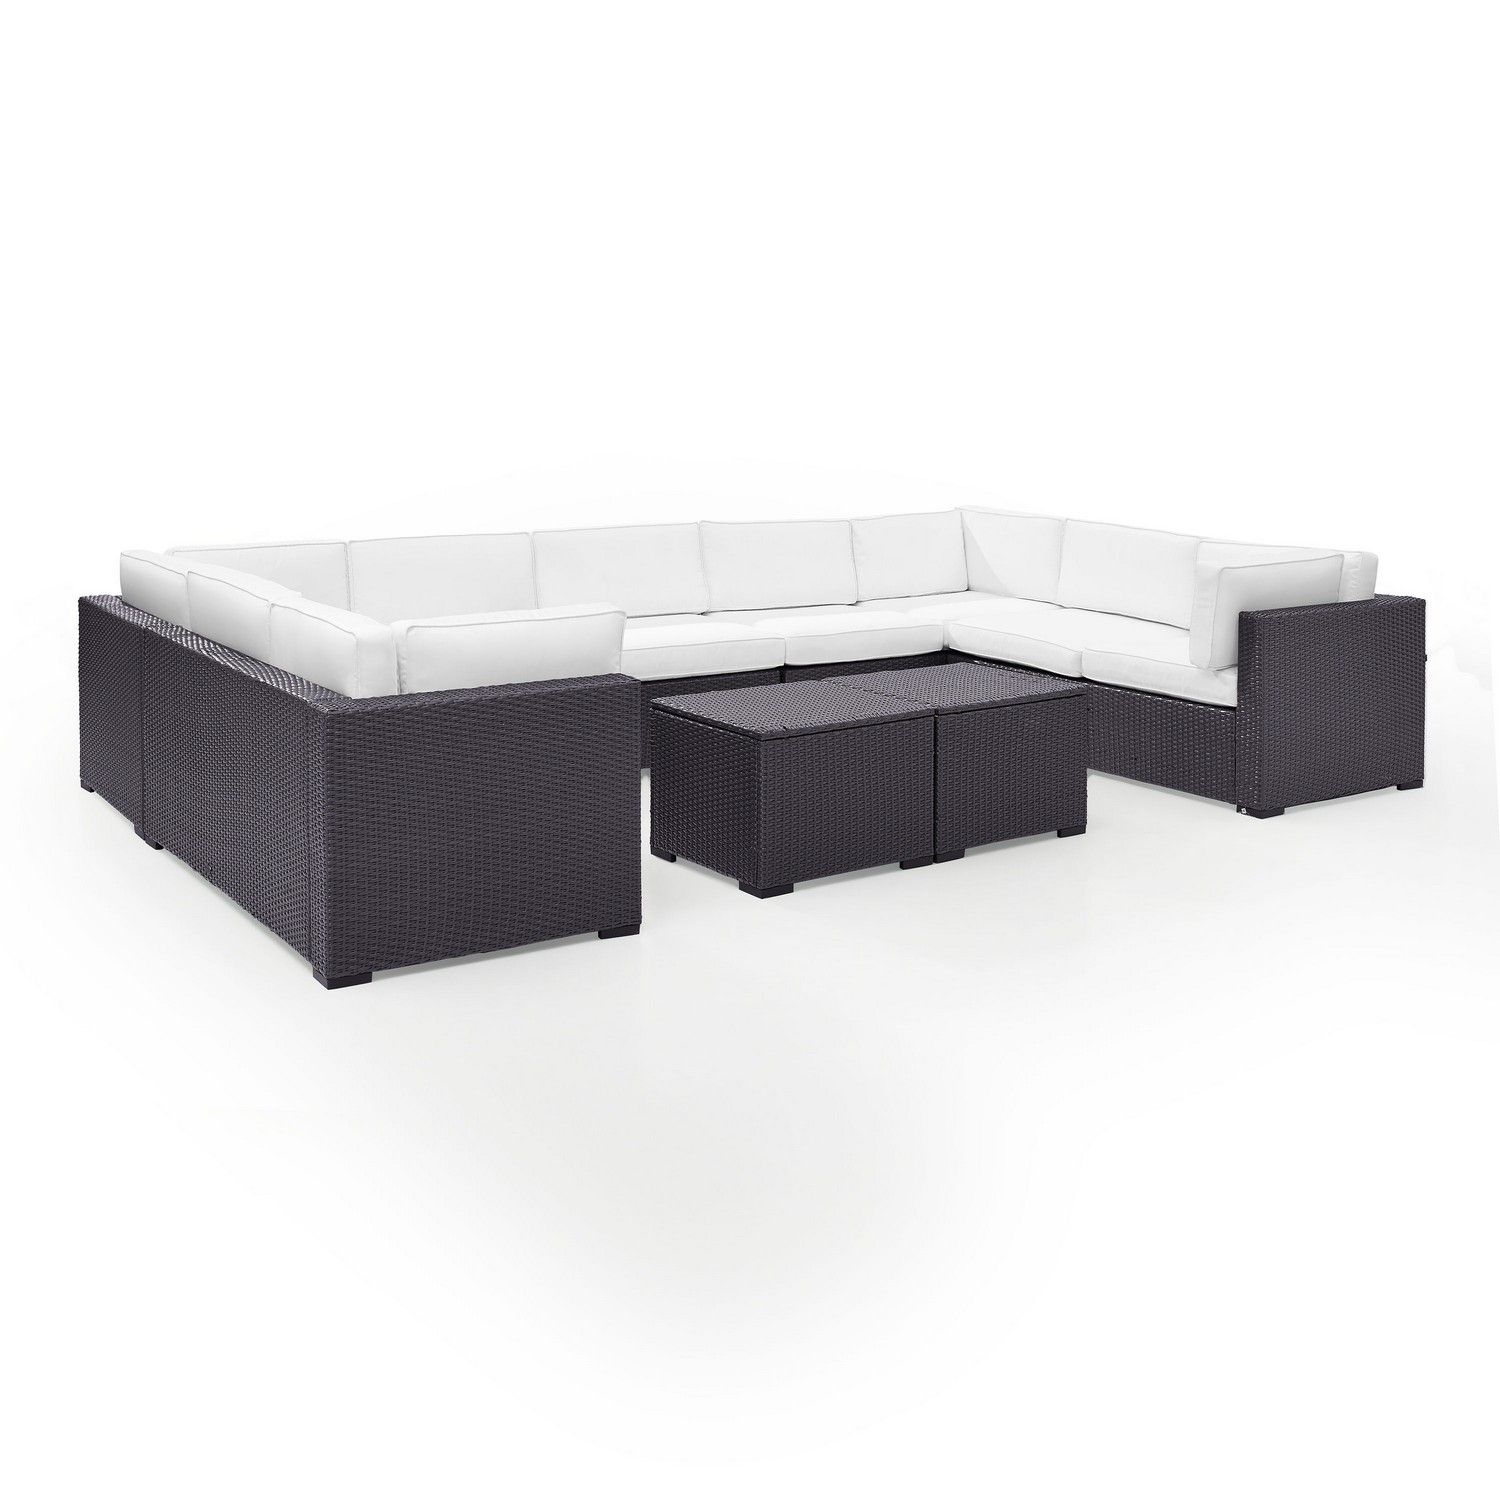 Crosley Biscayne 7-PC Outdoor Wicker Sectional Set - 4 Loveseats, Armless Chair, 2 Coffee Tables - White/Brown